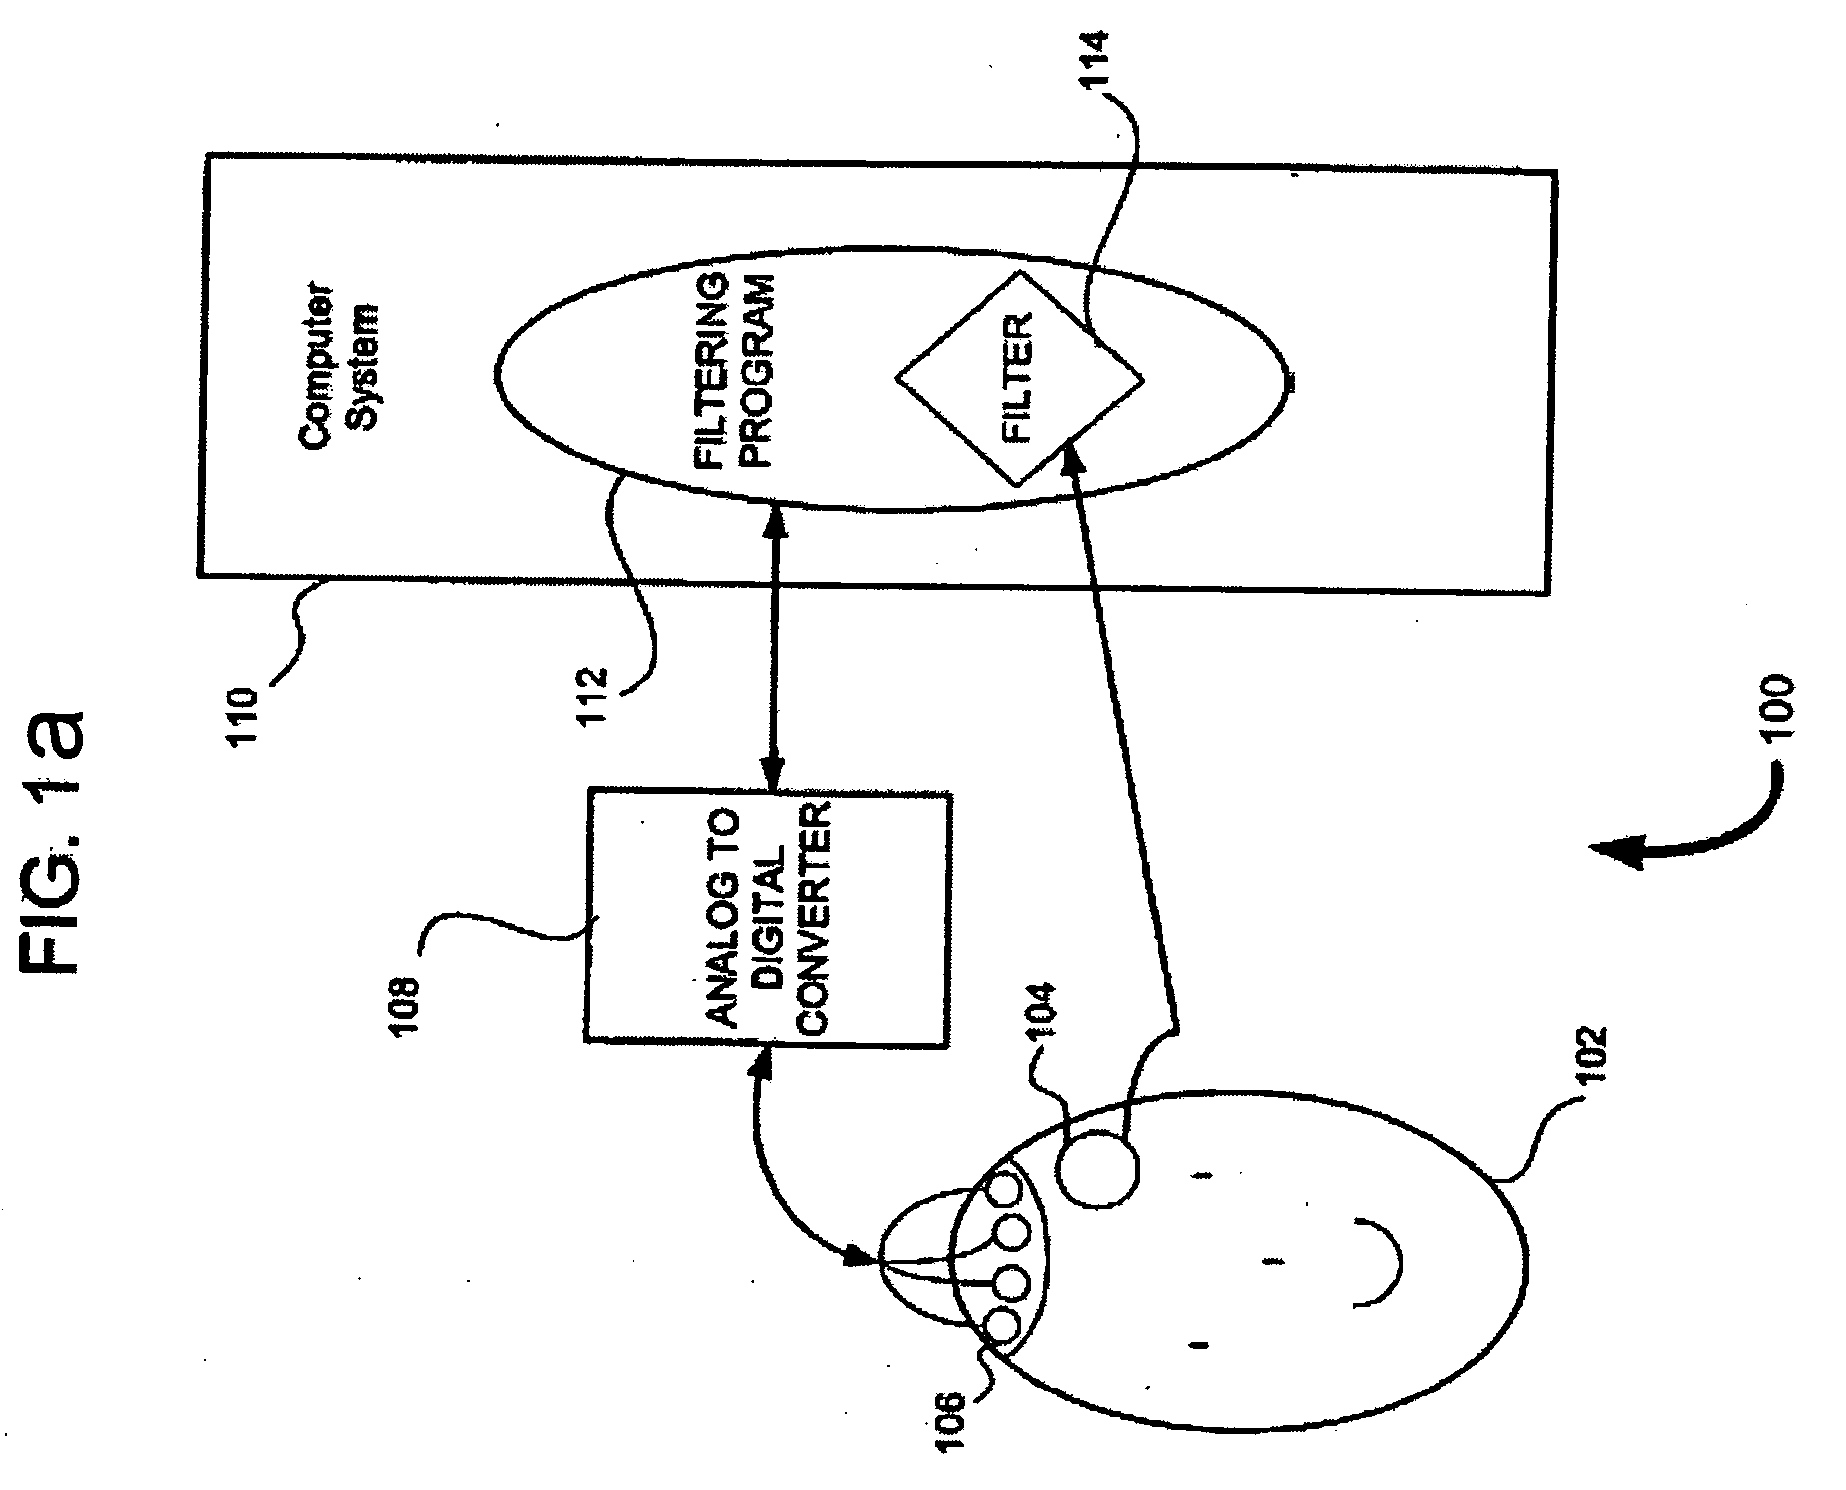 Apparatus and method for ascertaining and recording electrophysiological signals